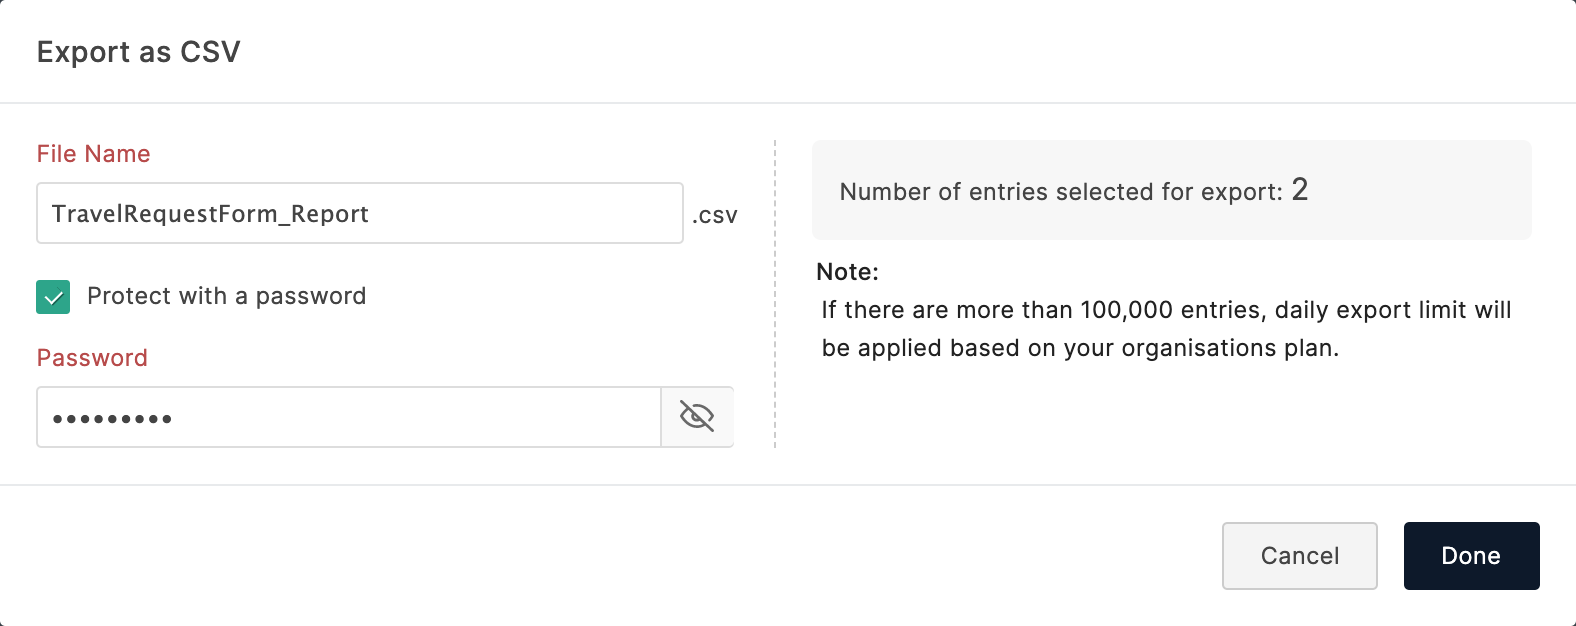 Exporting Selected Entries as CSV